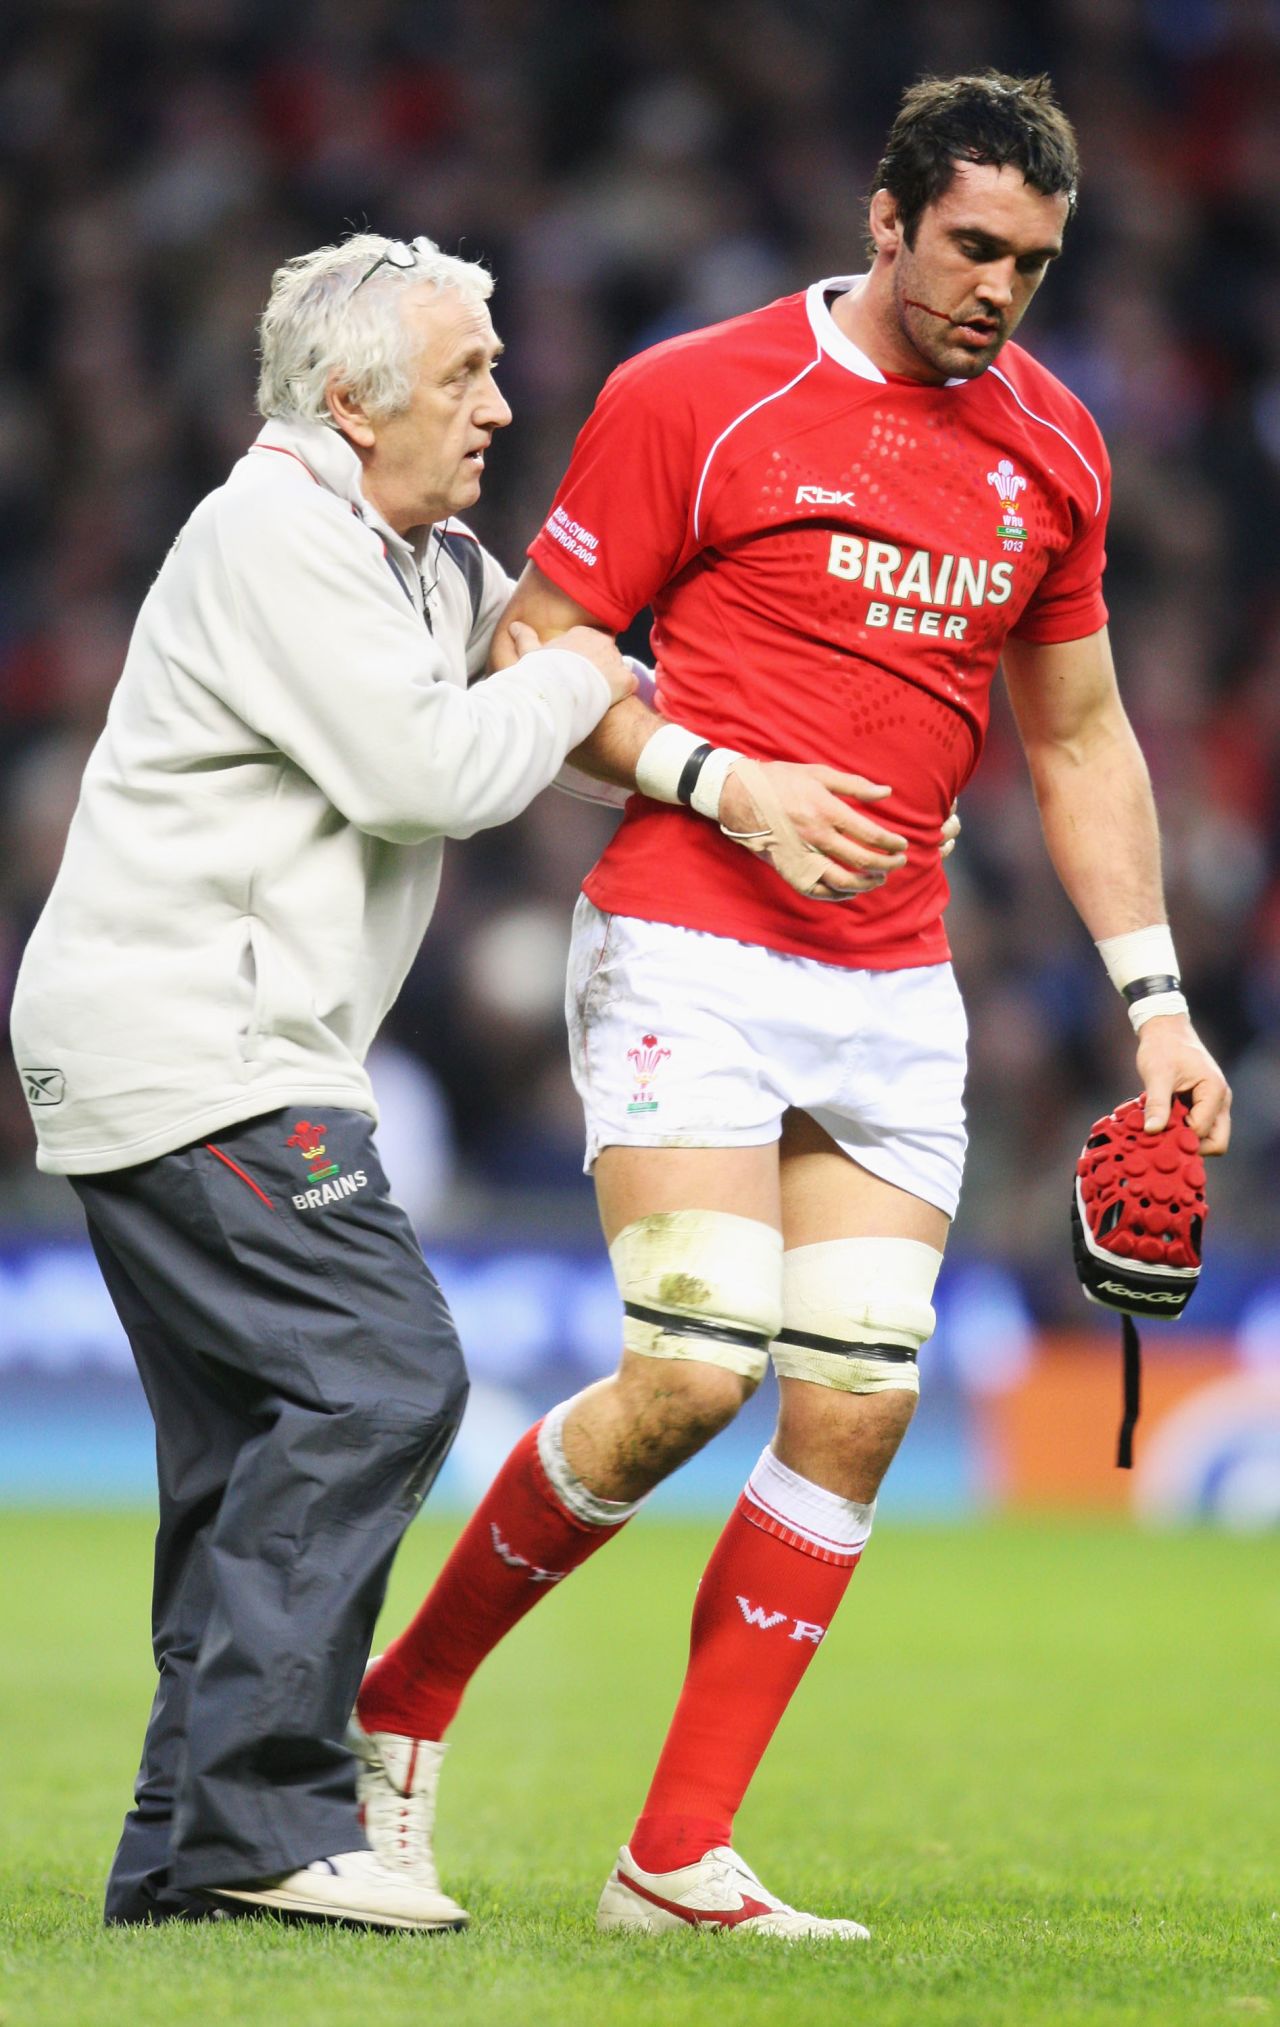 Thomas represented Wales 67 times, playing in two World Cups and winning the Six Nations twice. He noticed something was amiss last season when he started getting mild seizures during training. There were accompanied by memory loss and personality changes.